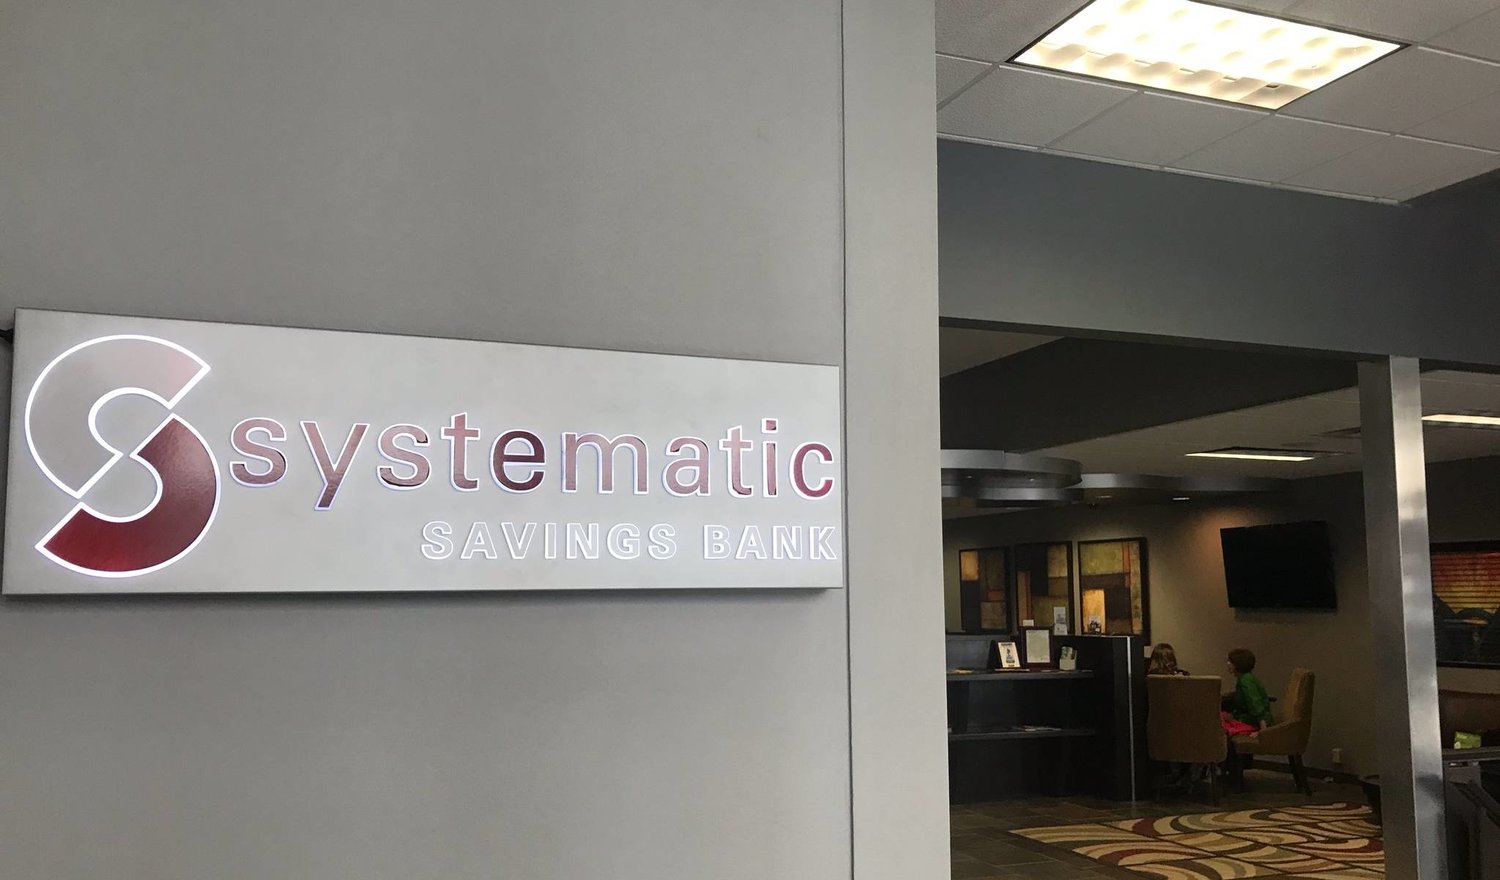 Systematic soon is planning a switch to a stock savings bank.